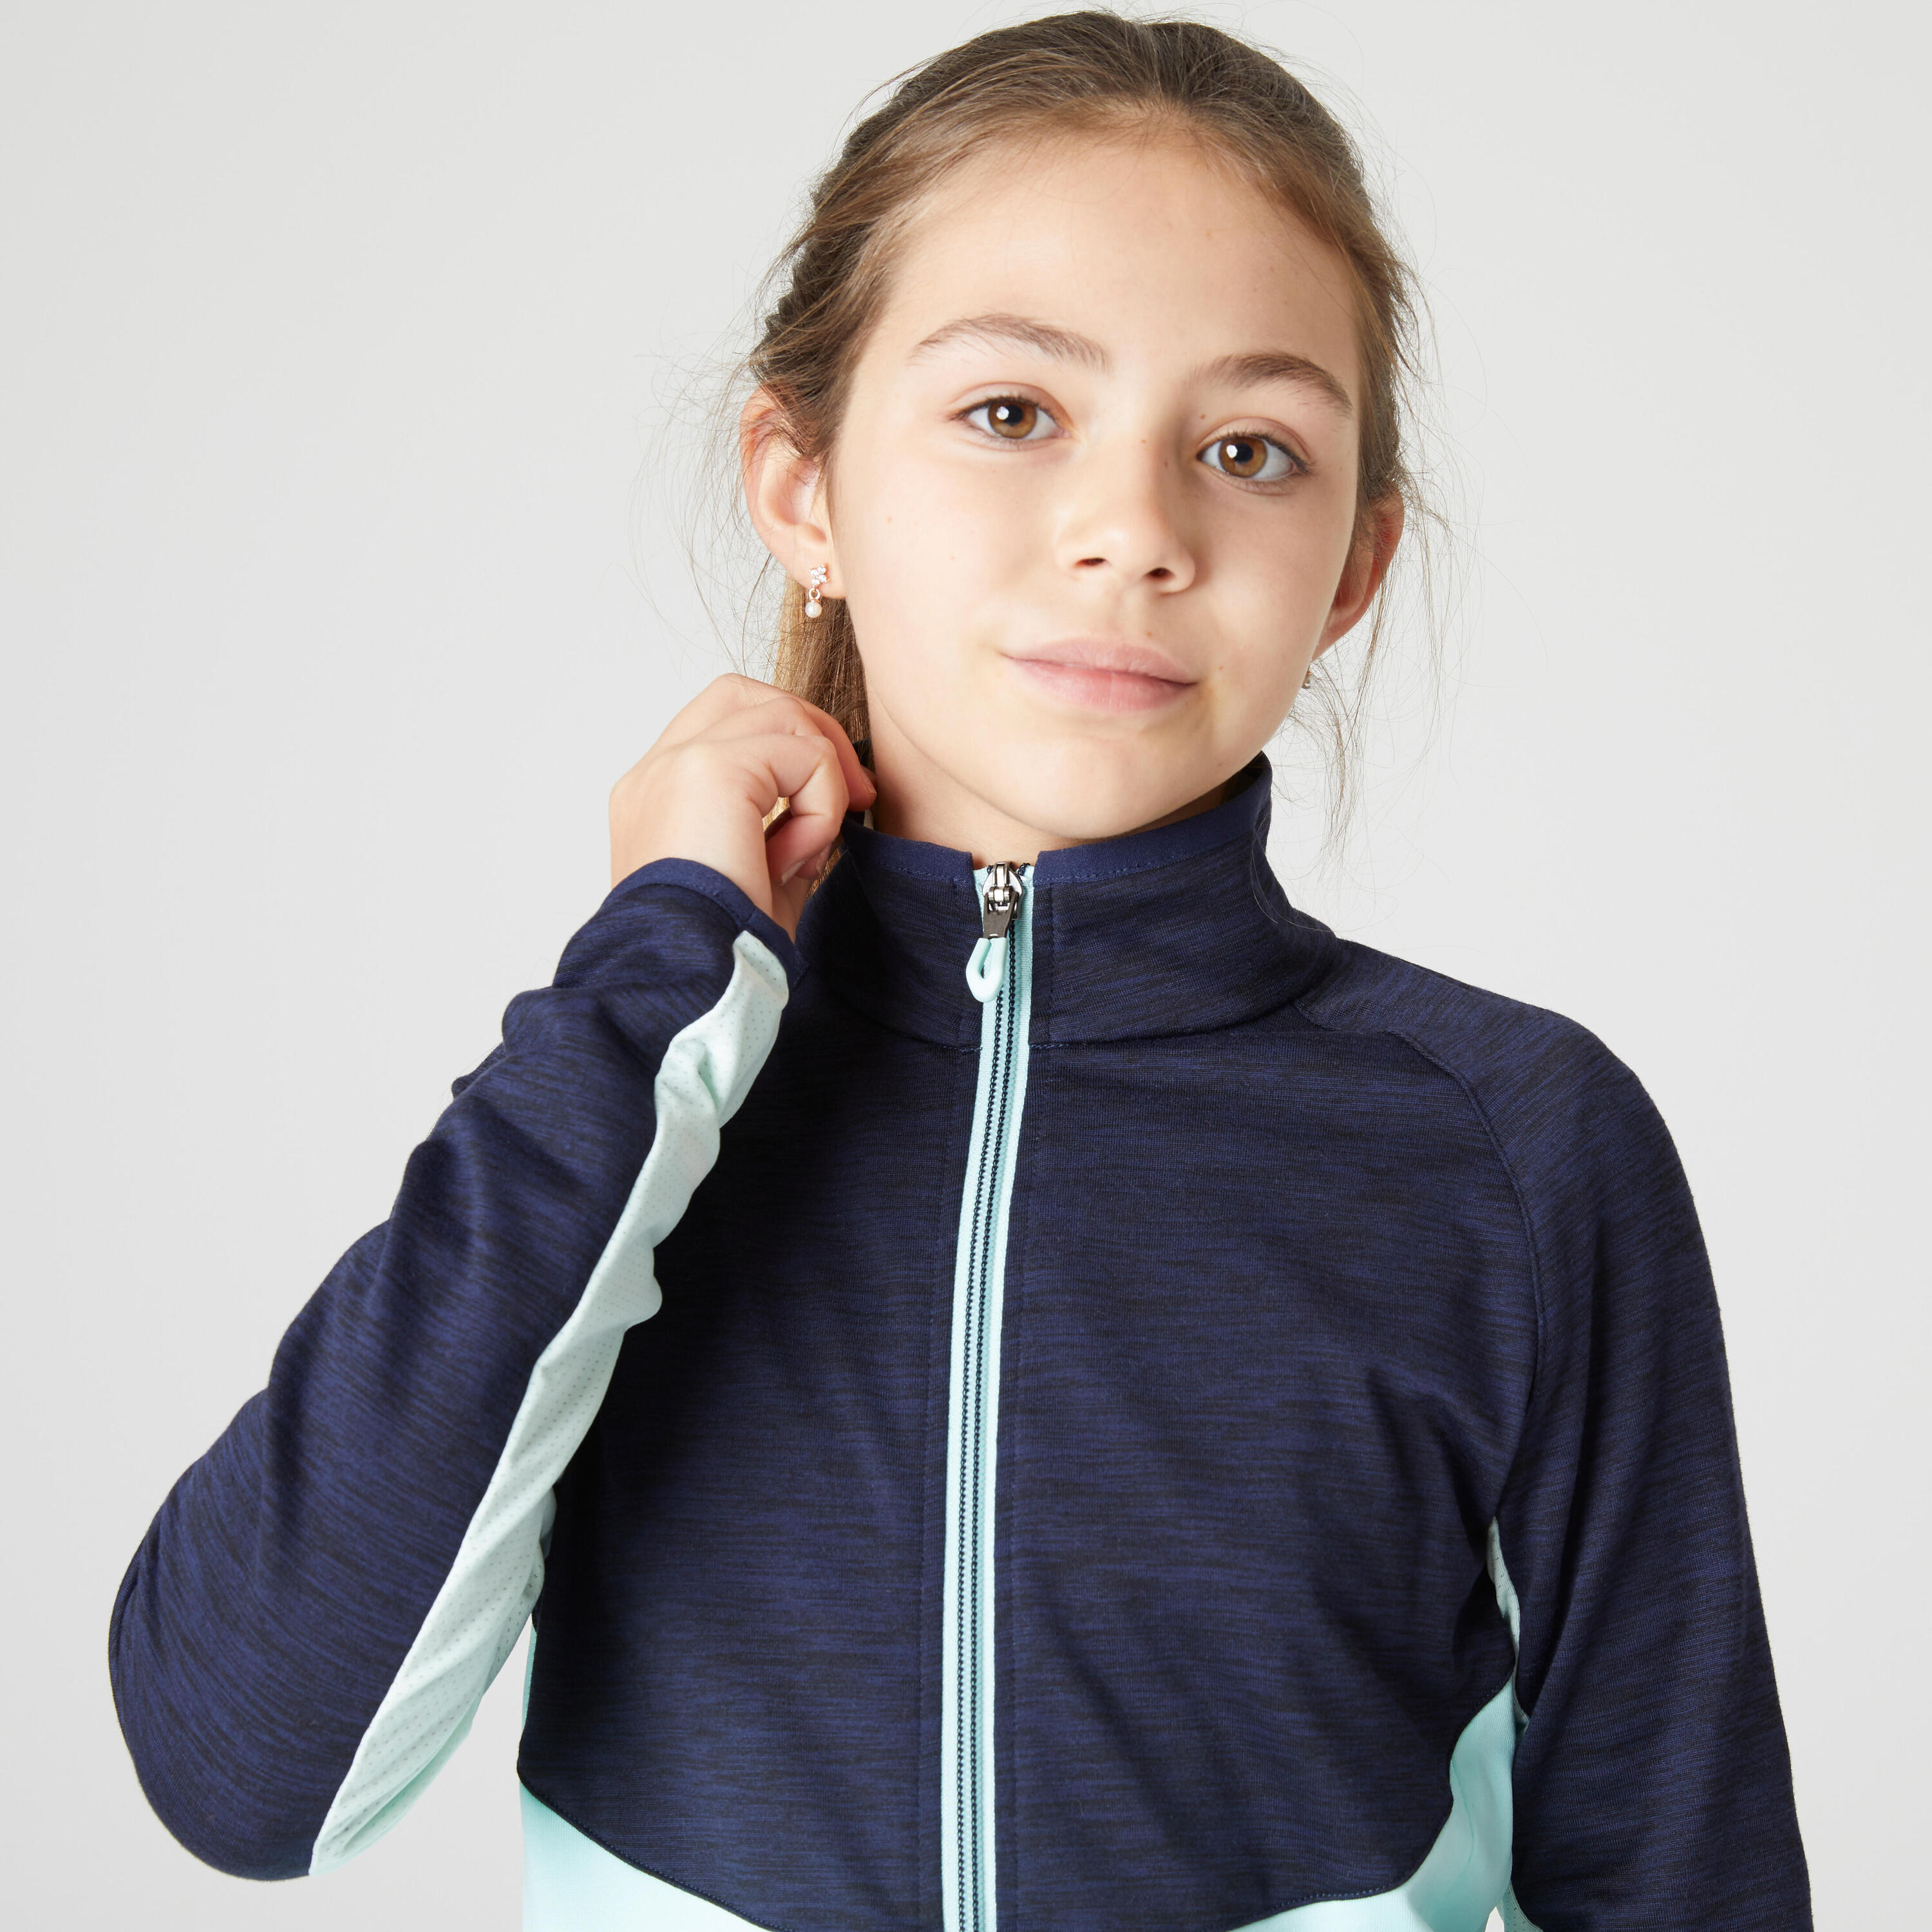 Kids' Breathable Tracksuit S500 - Navy & Green 2/8